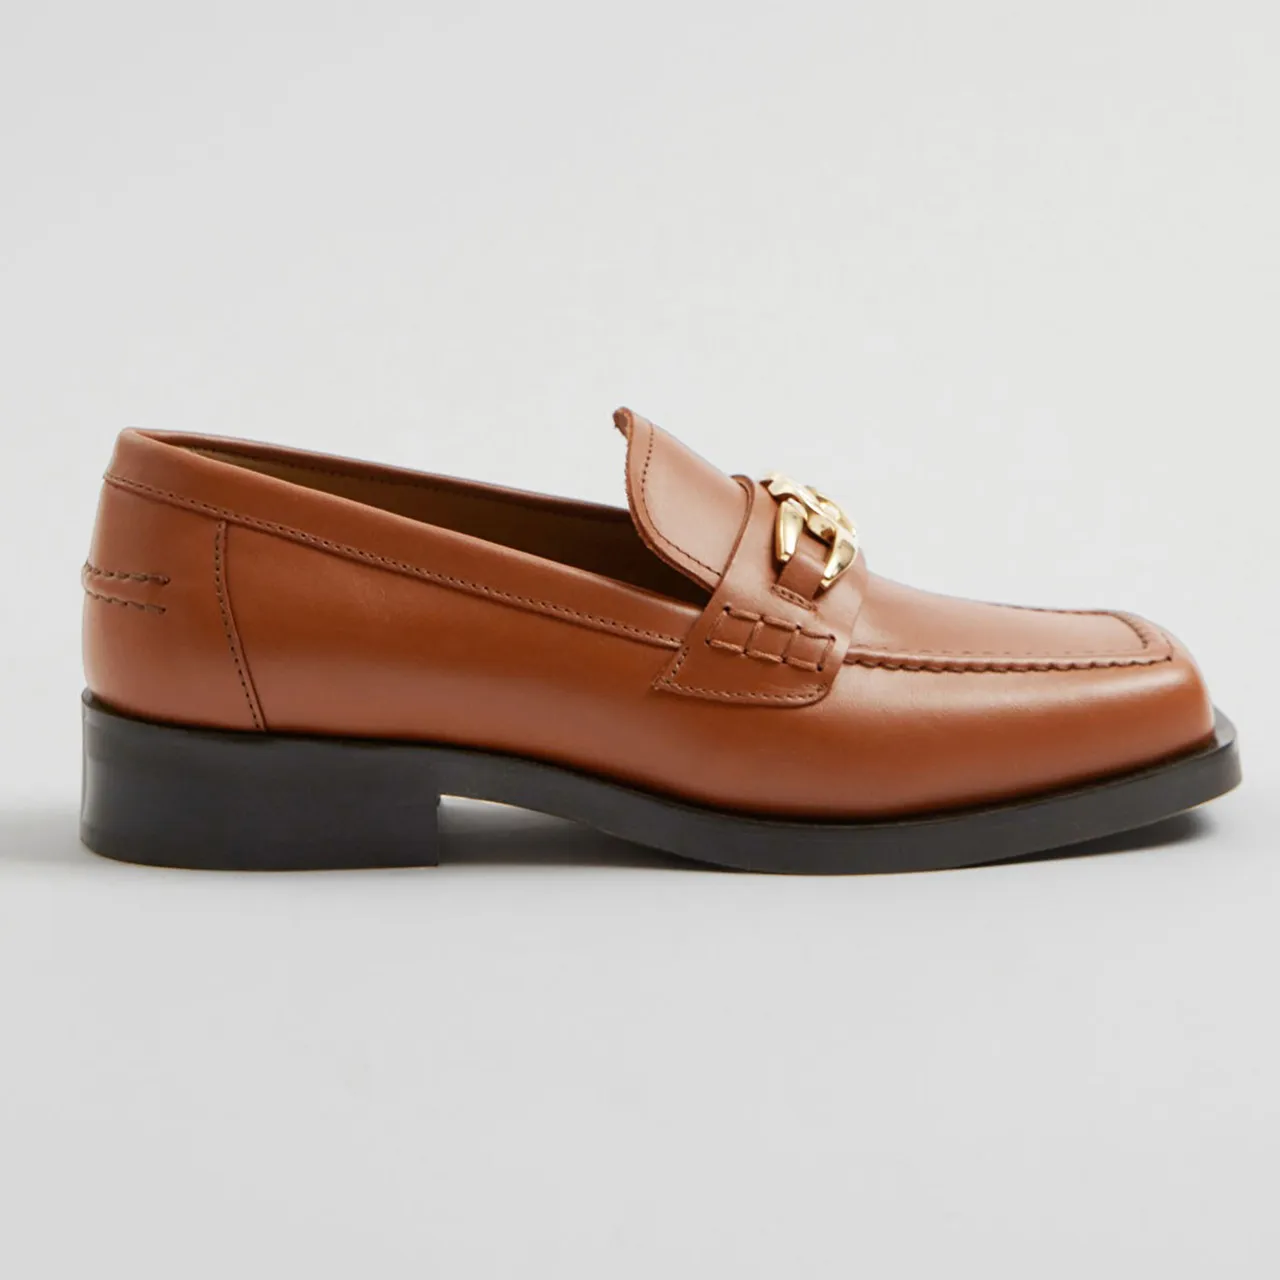 Squared toe loafers